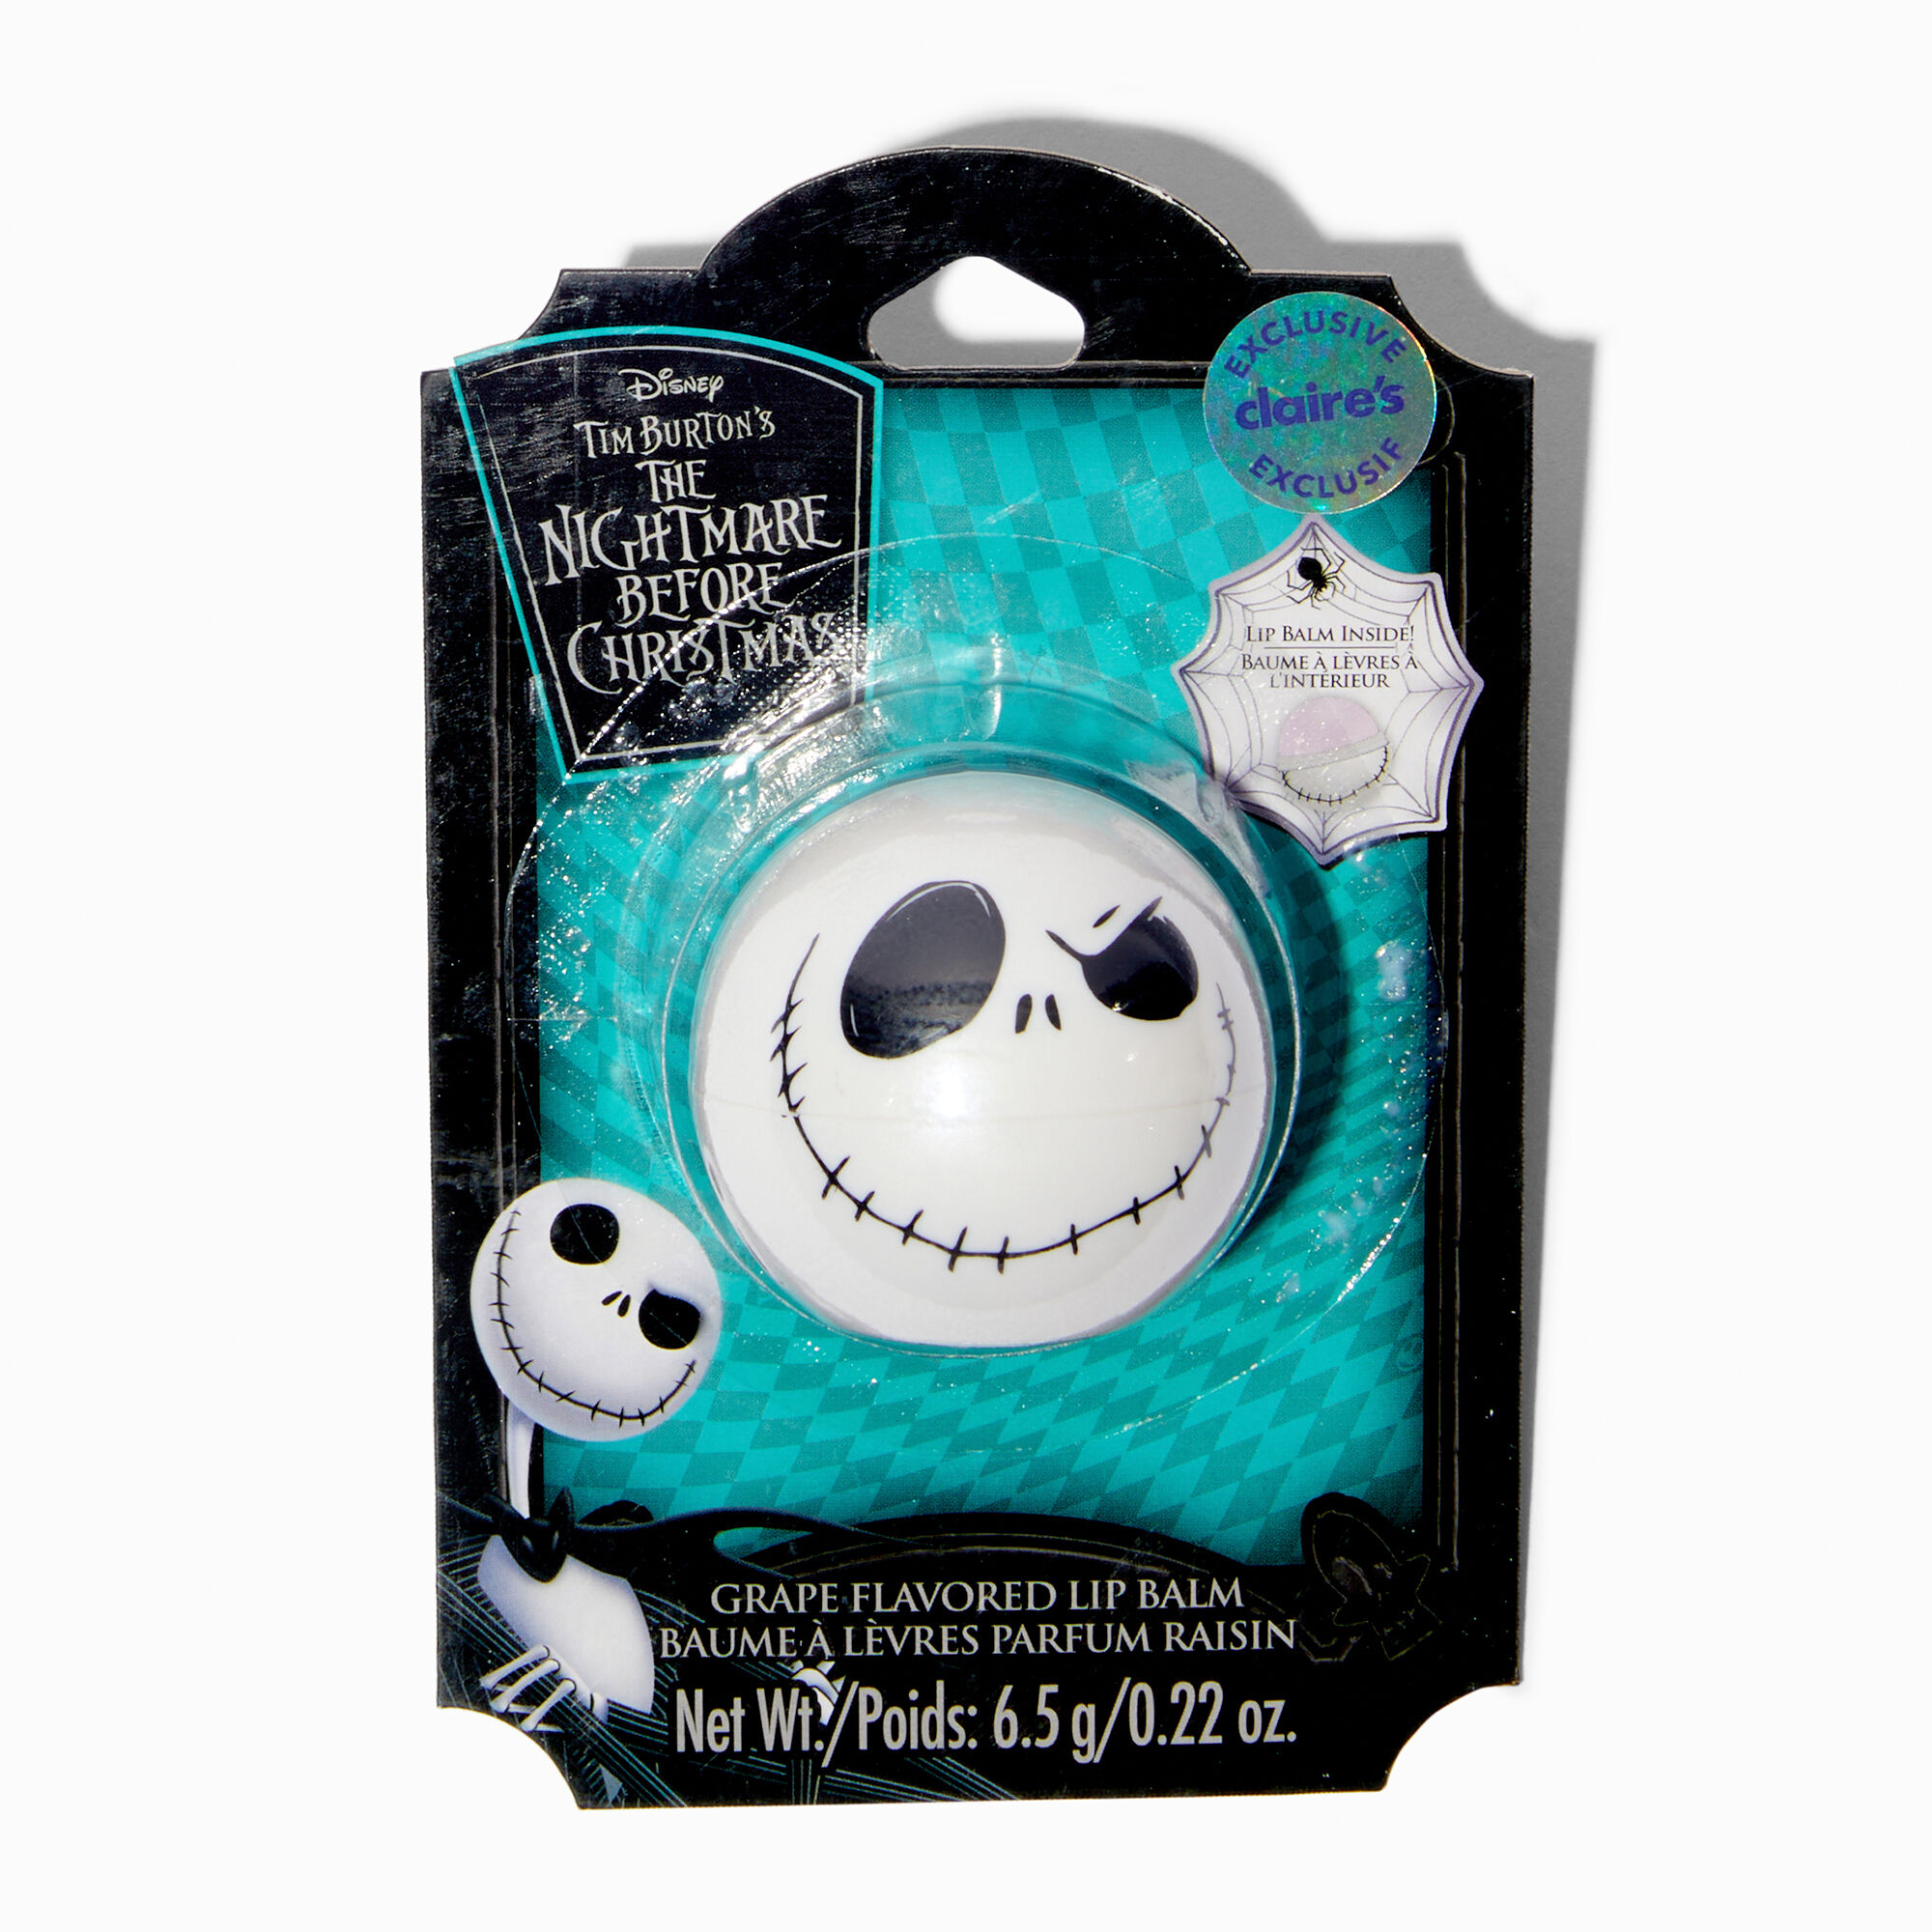 View The Nightmare Before Christmas Claires Exclusive Jack Skellington Novelty Lip Balm information